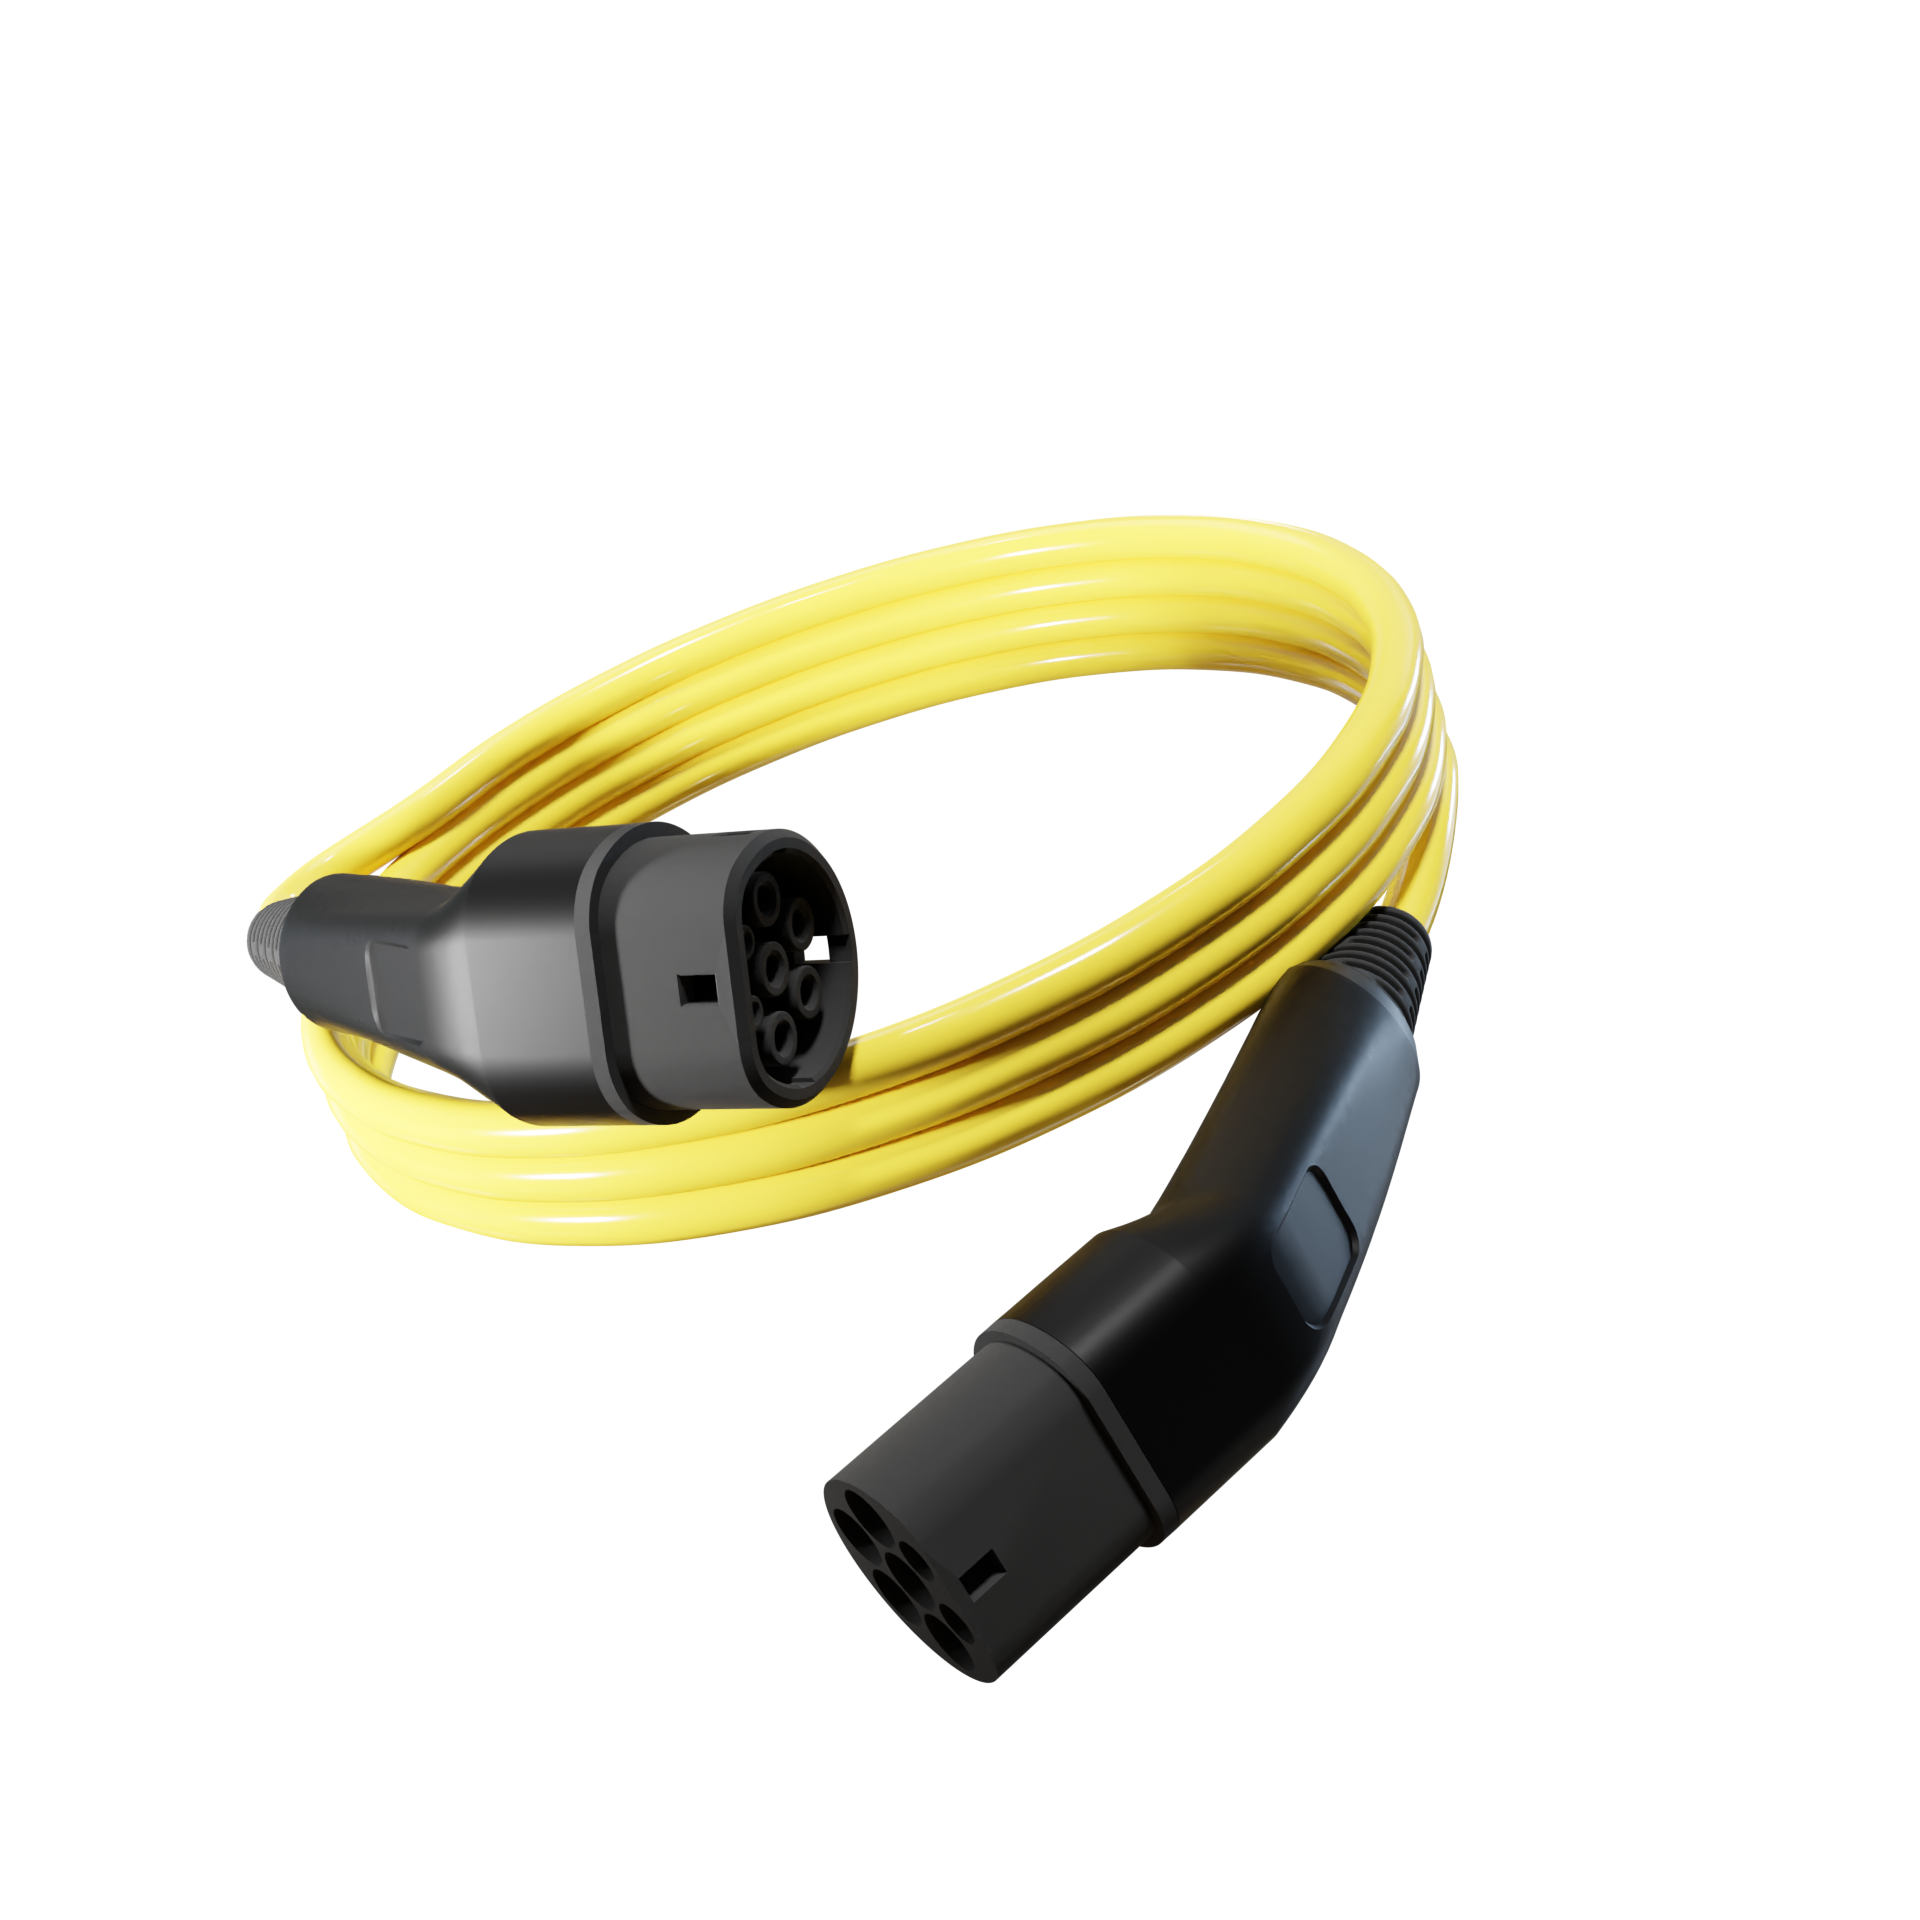 110V YELLOW EXTENSION LEAD WITH PLUG AND SOCKET 5M - 50M SITE